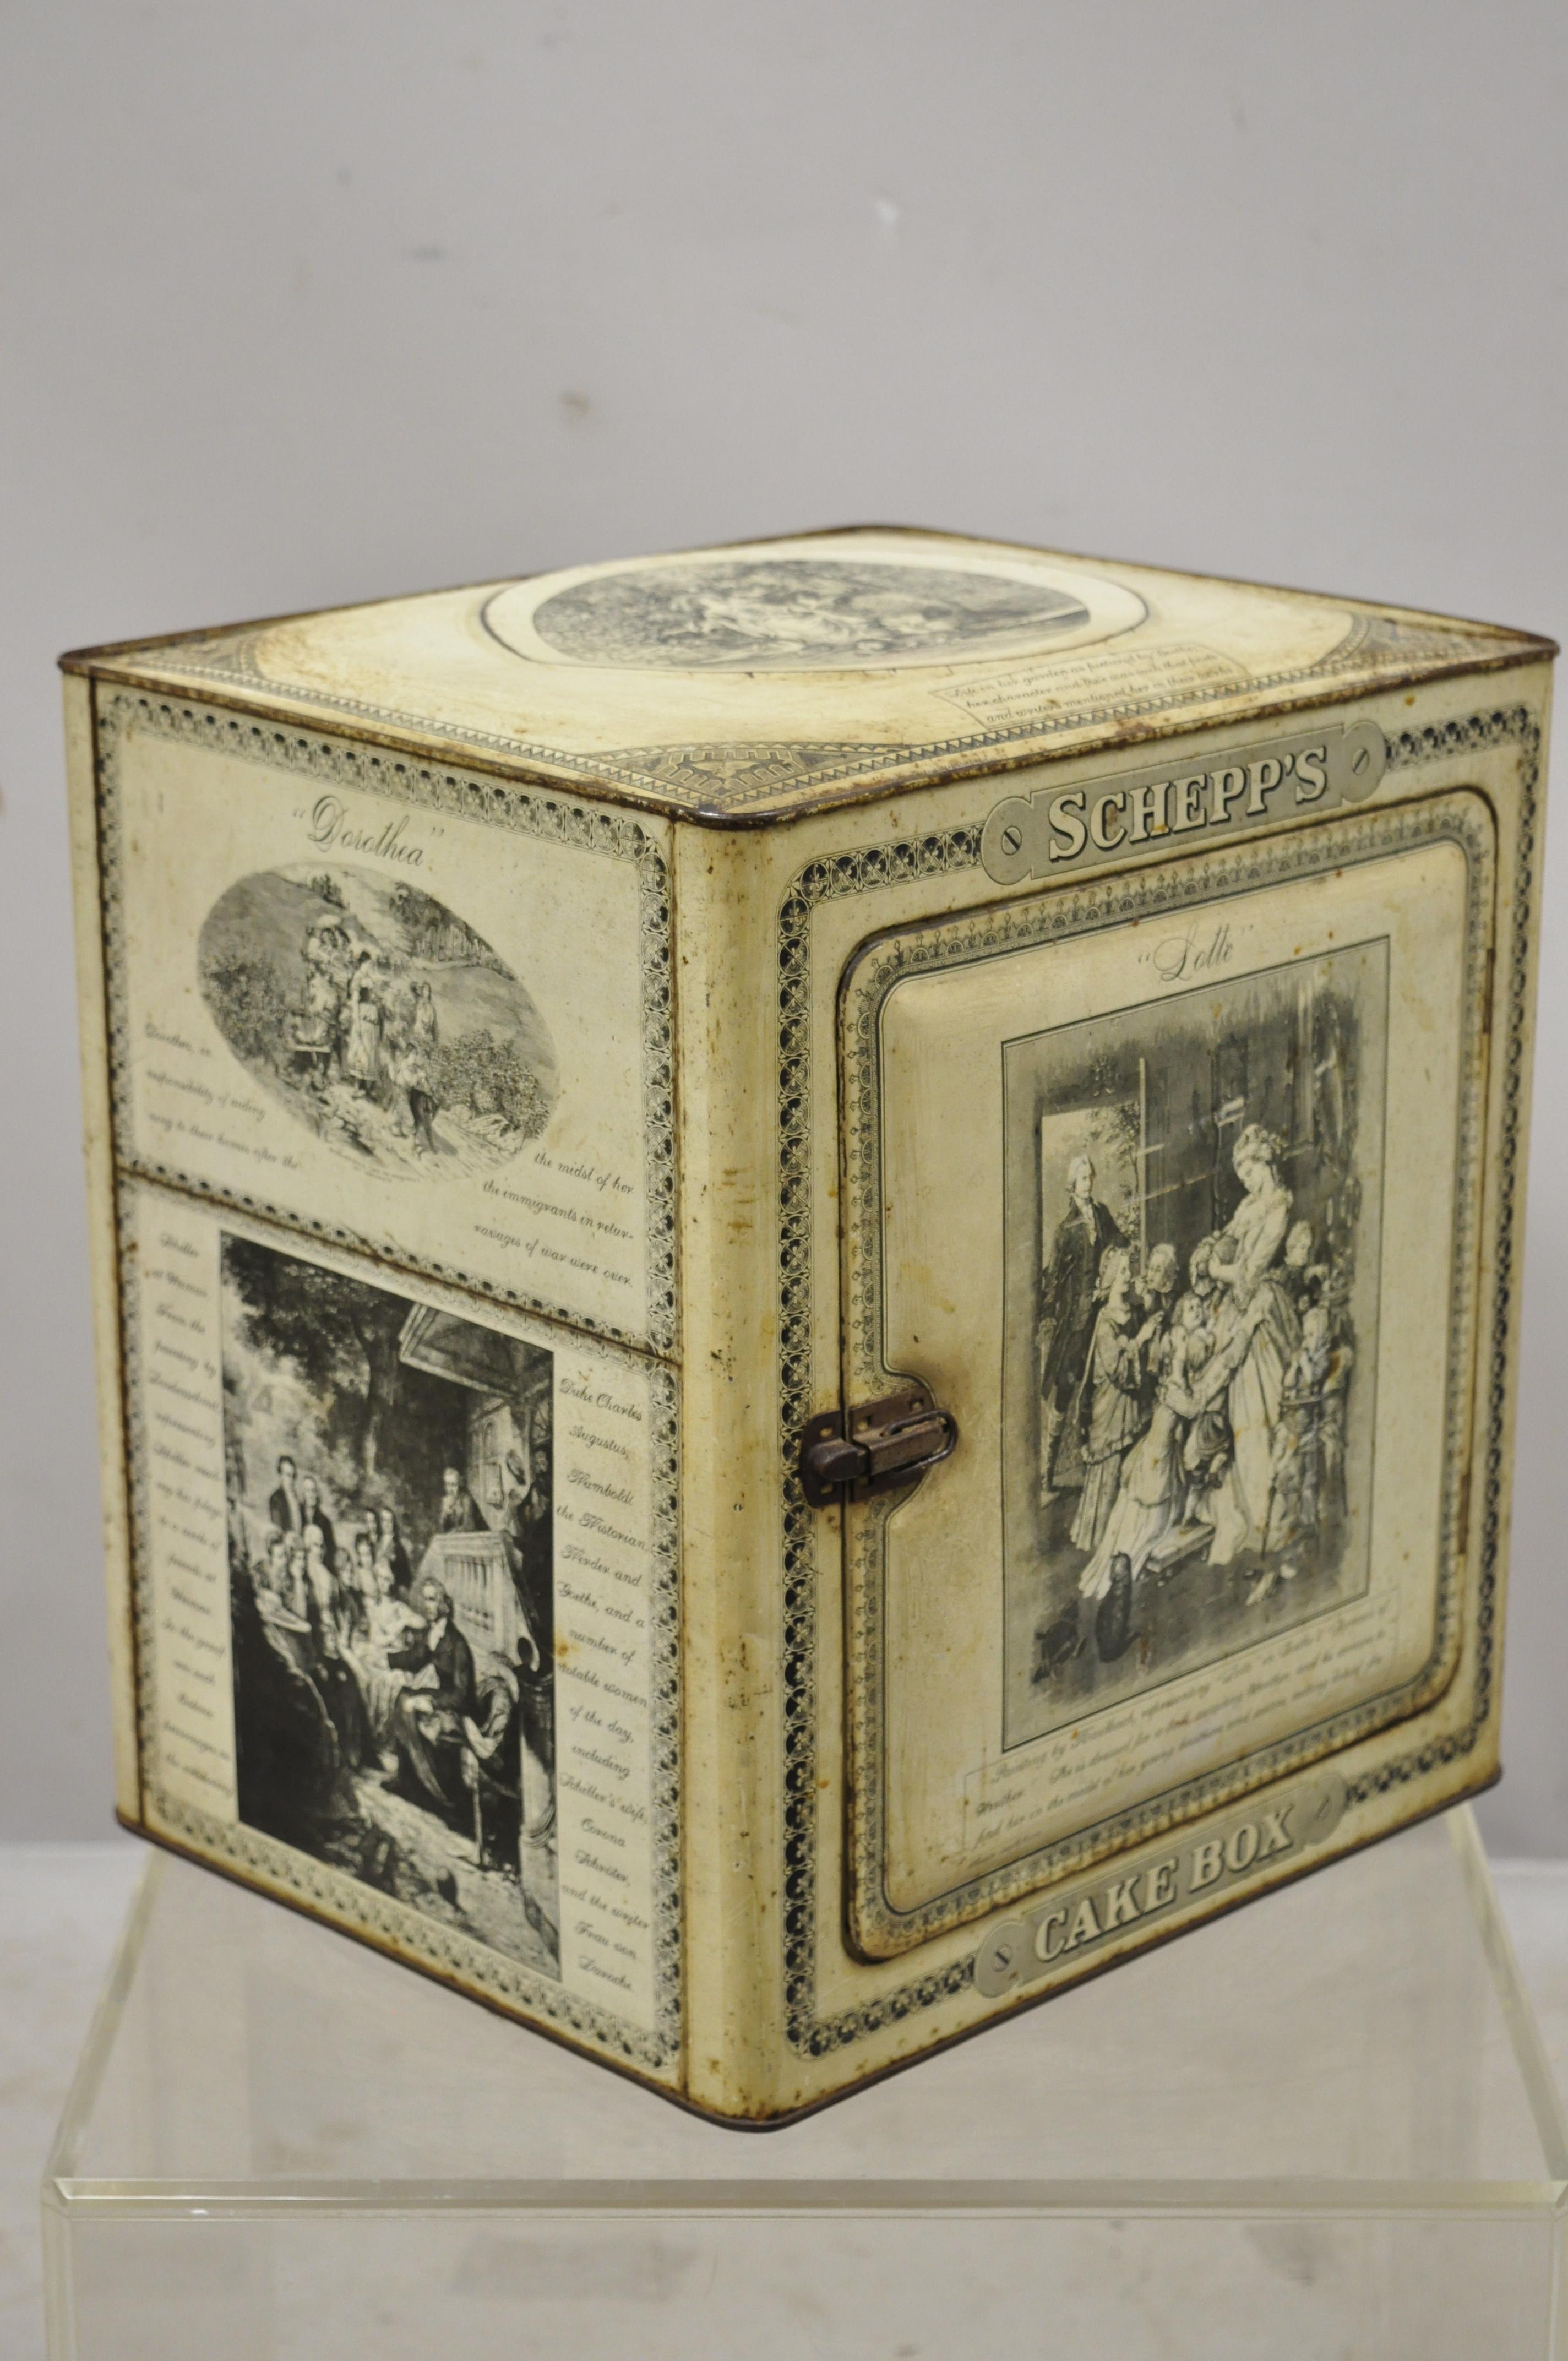 Antique Schepp's cake box advertising French lithographs tin metal. Item features beautiful Victorian French style lithographs all around, interior shelf, tin metal construction, very nice antique item, great style and form. Circa early 1900s.